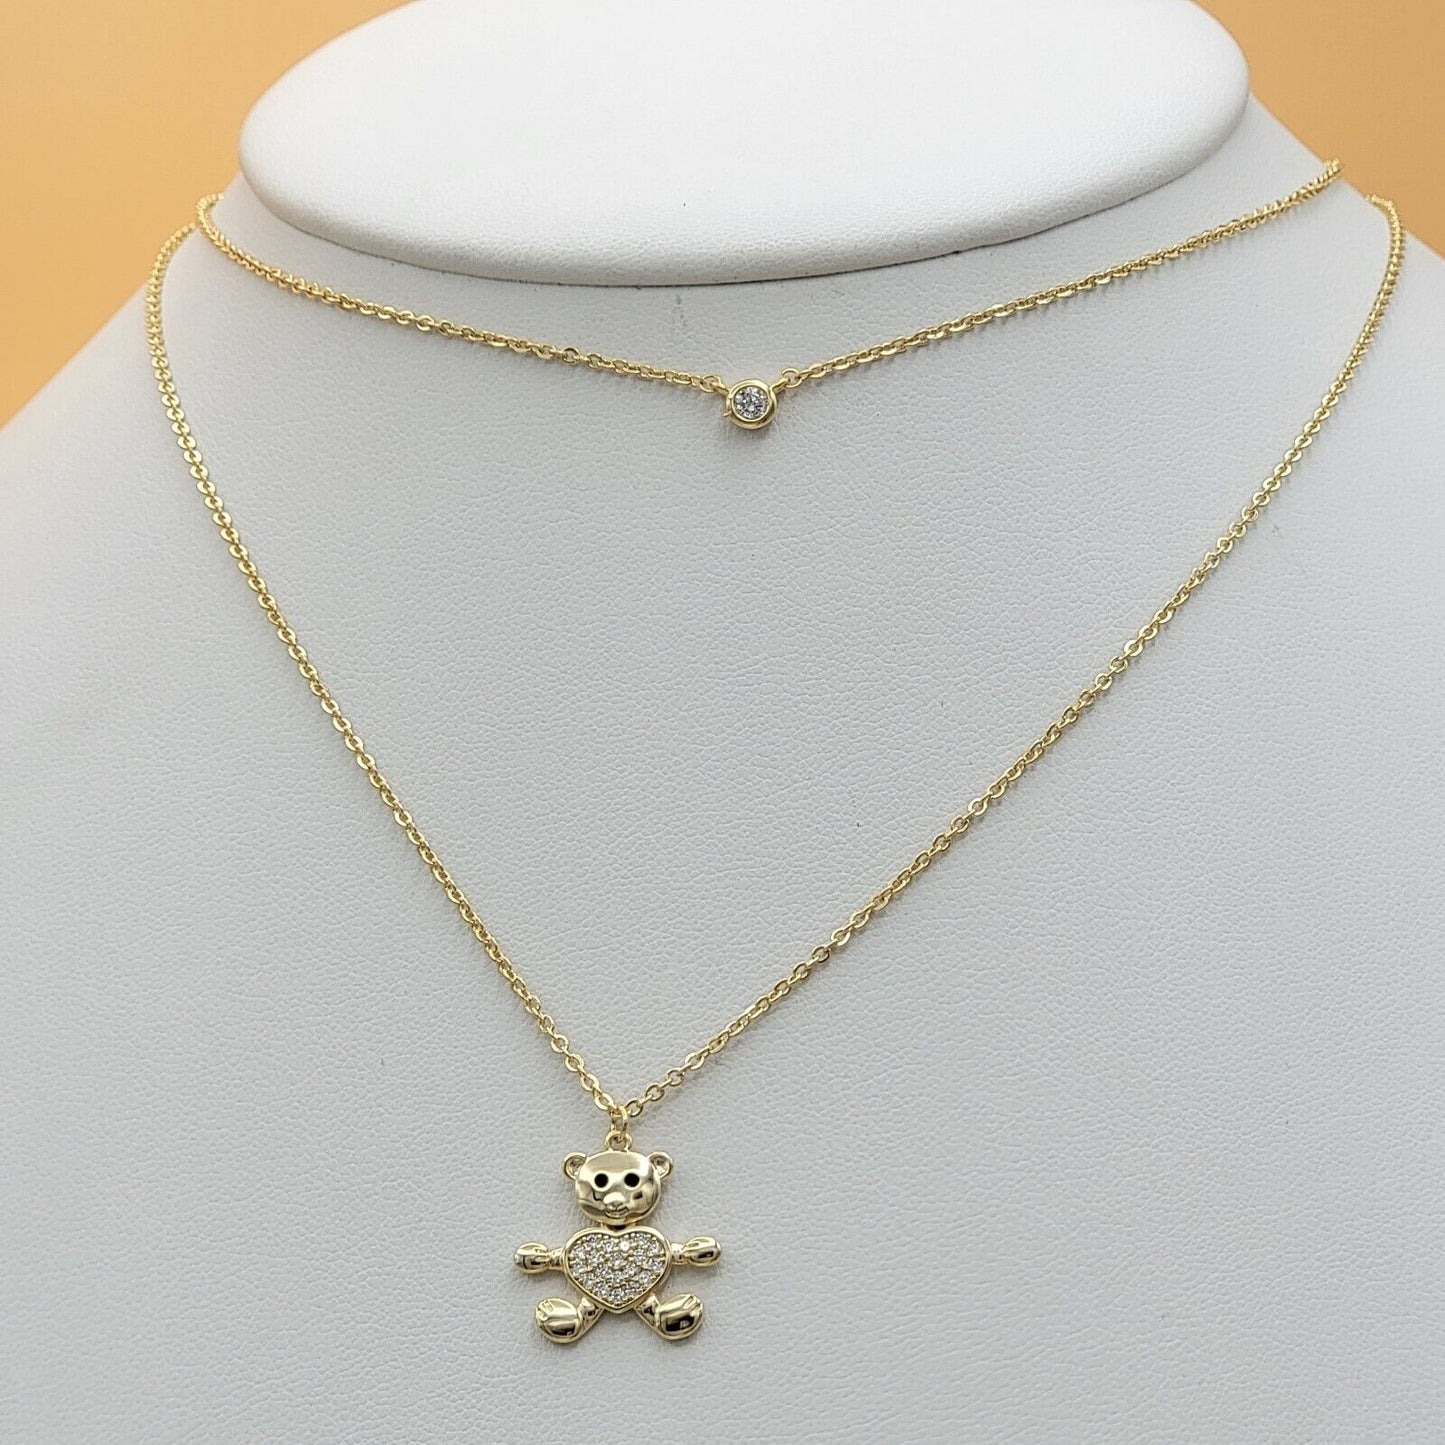 Necklaces - 14K Gold Plated. Double Chain Necklace Bear w crystal heart charm.